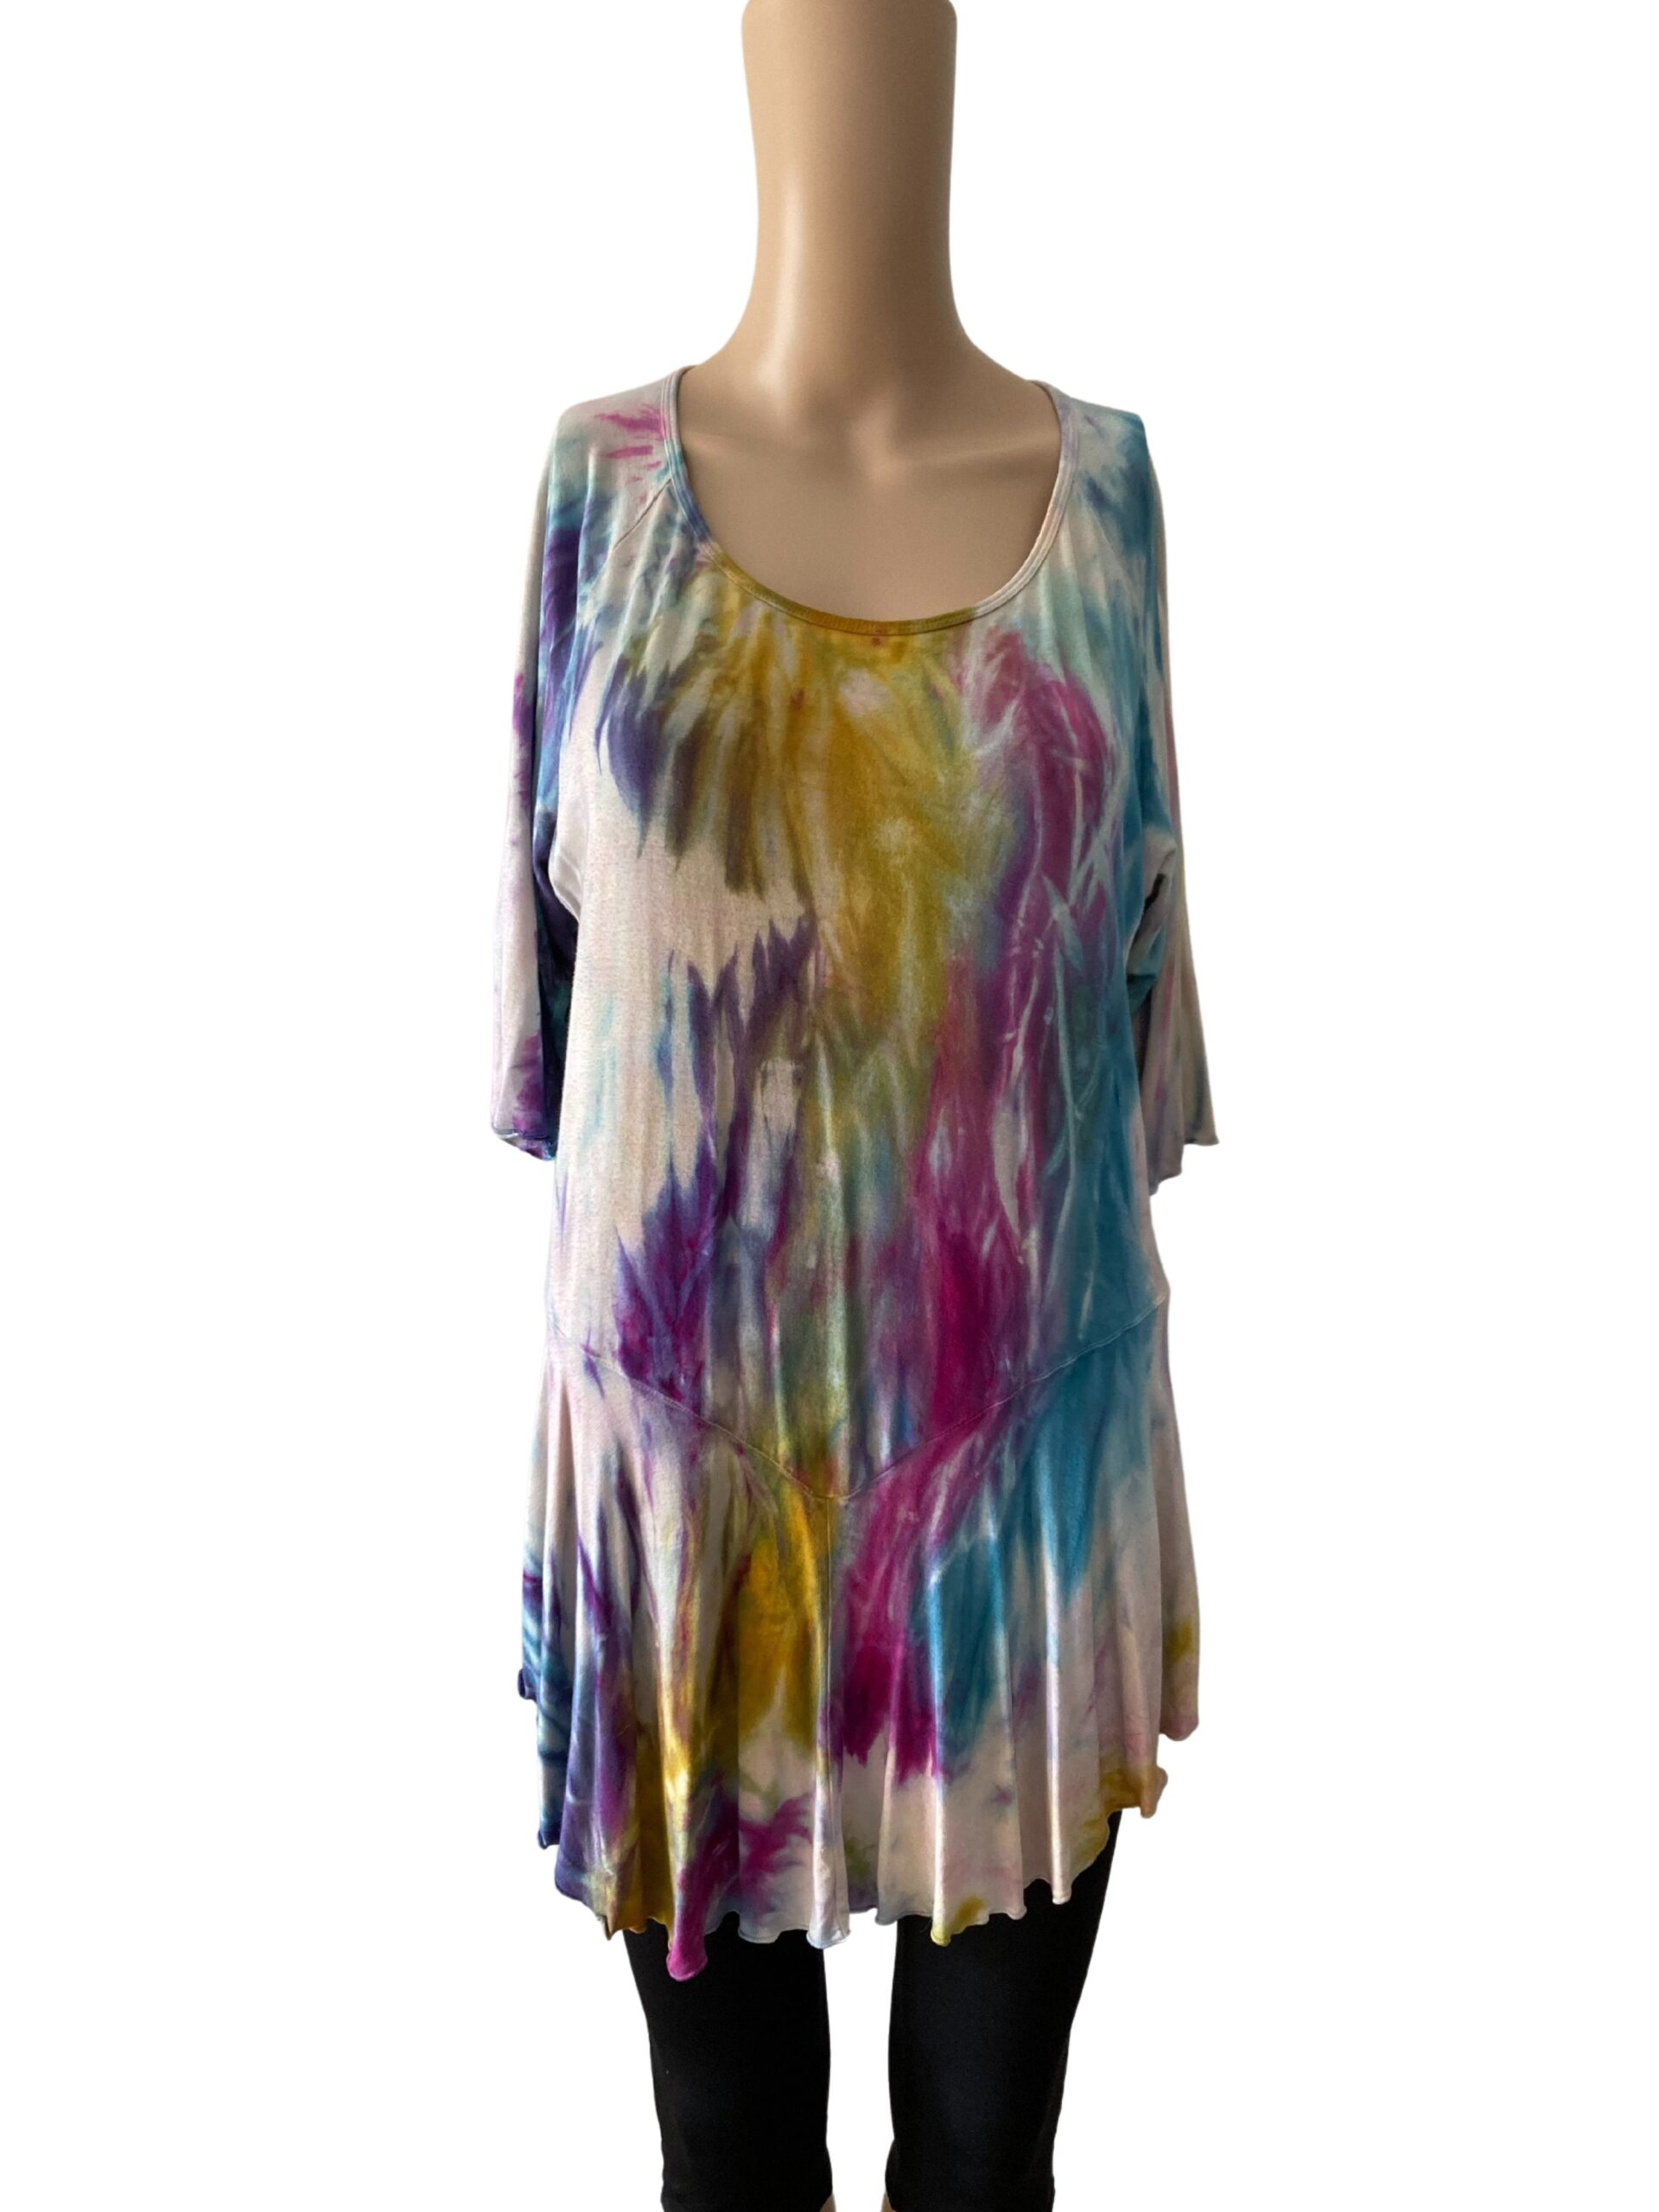 Tie dye Dharma Trading Co size XL tunic top - Catherines Fashion Finds